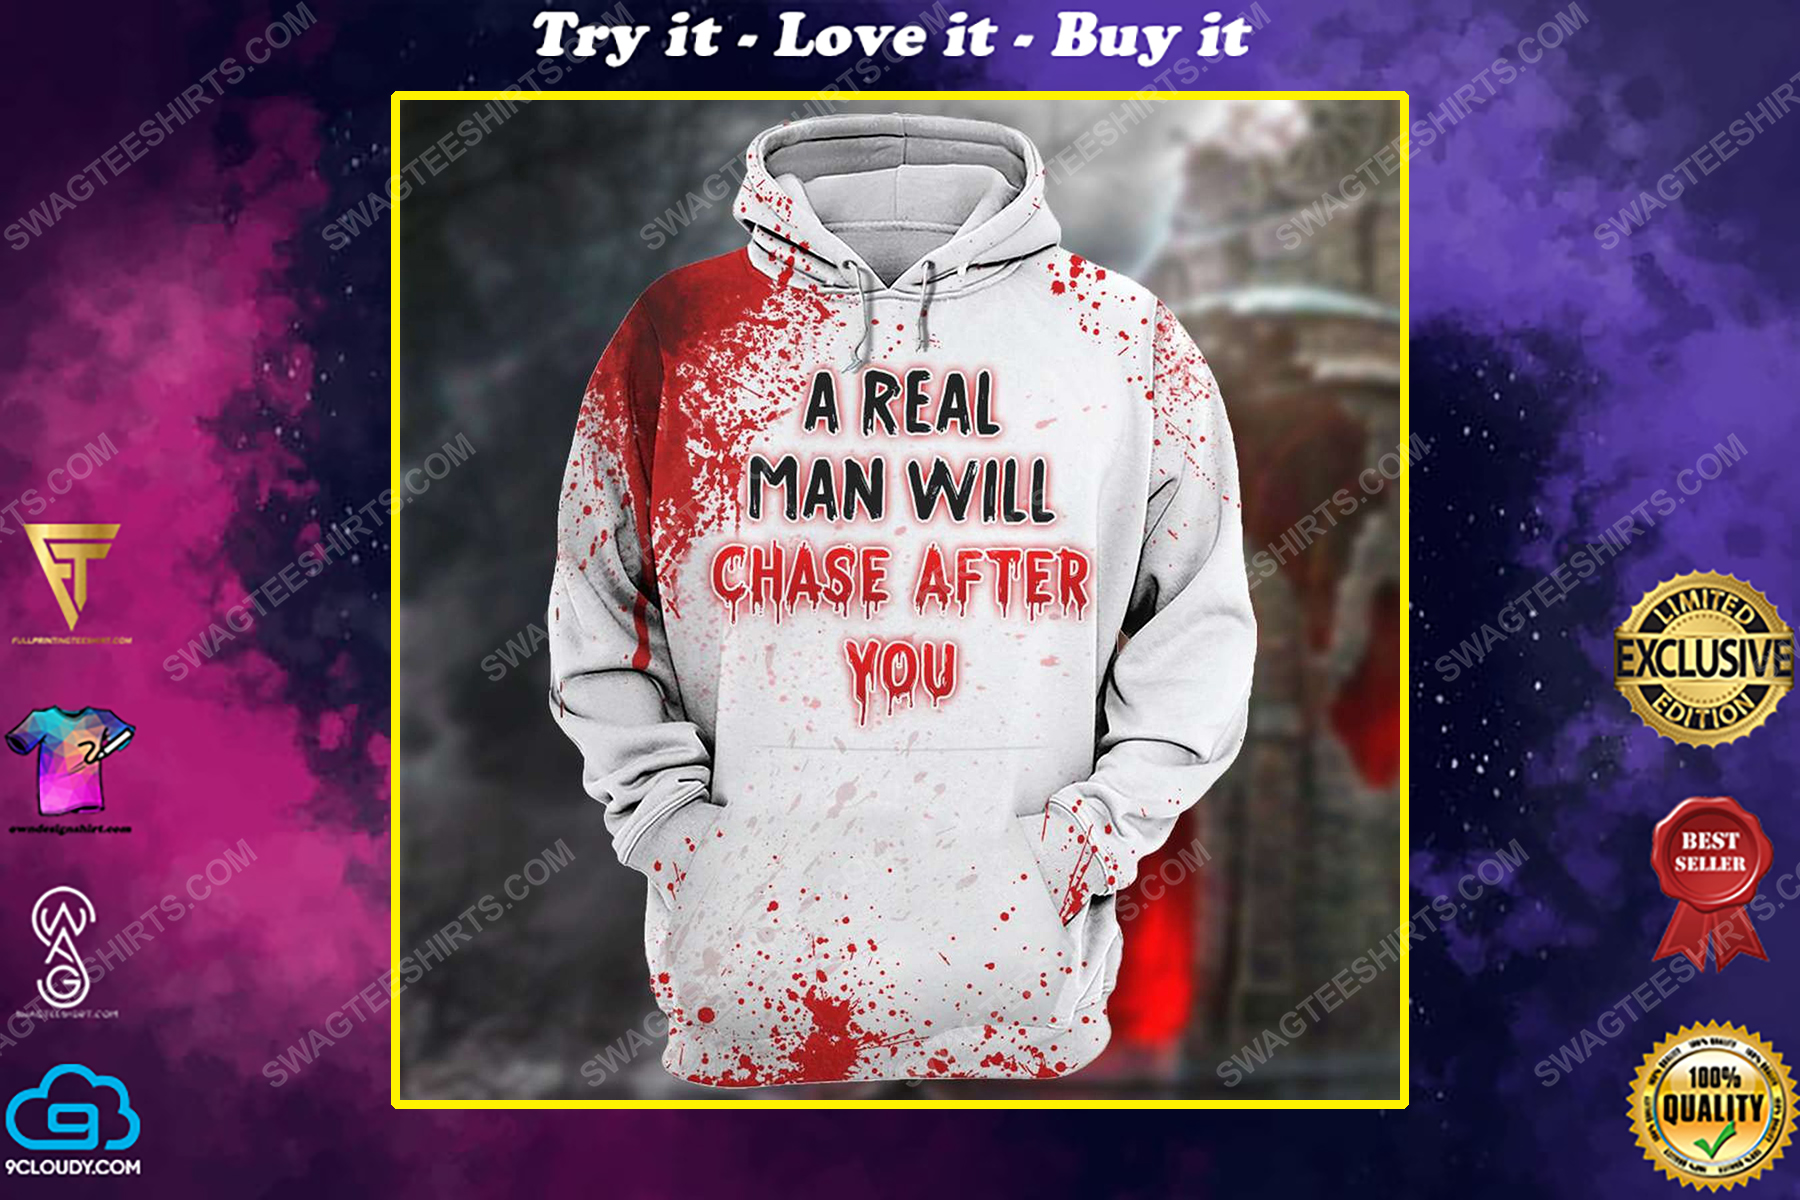 Halloween blood michael myers a real man will chase after you shirt 1